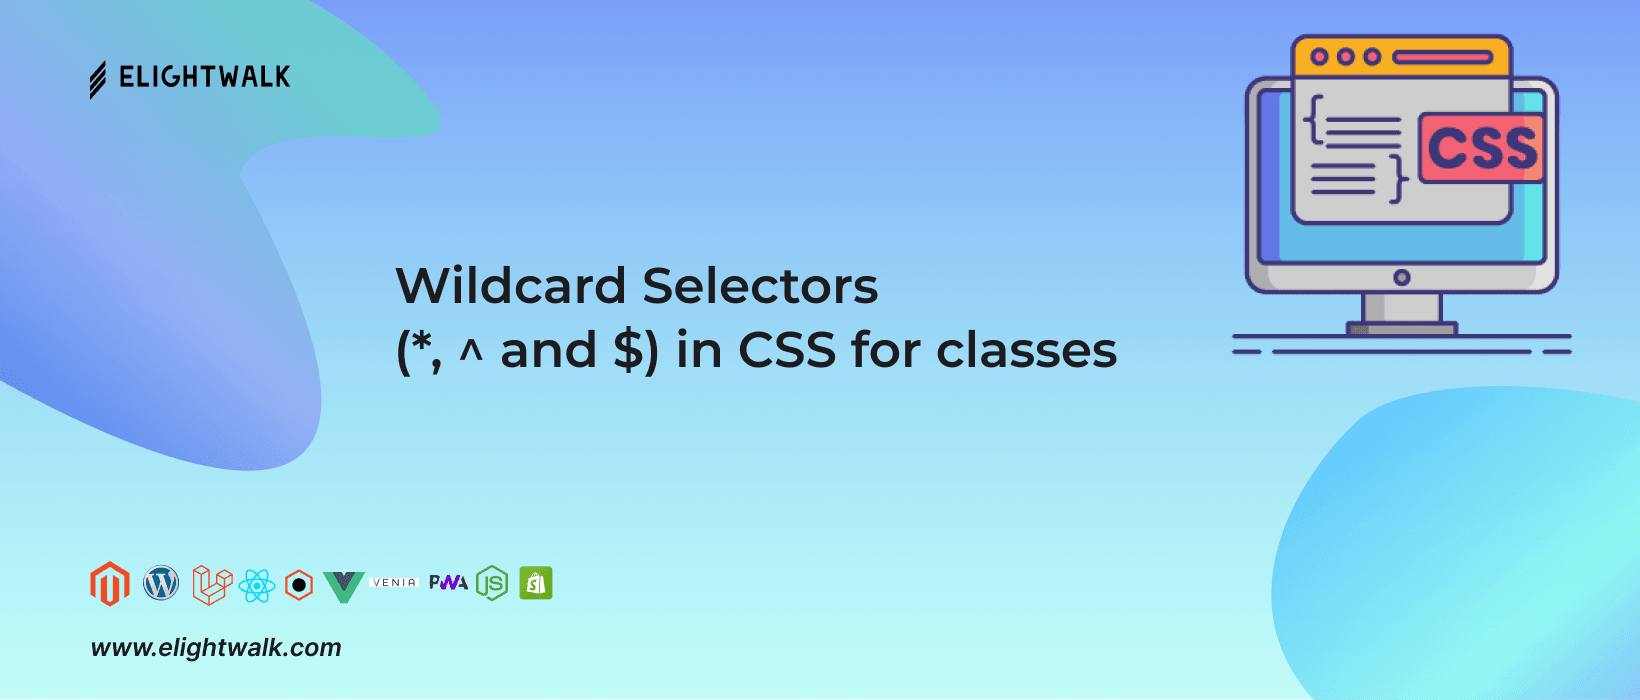  Wildcard Selectors (*, ^ and $) in CSS for classes